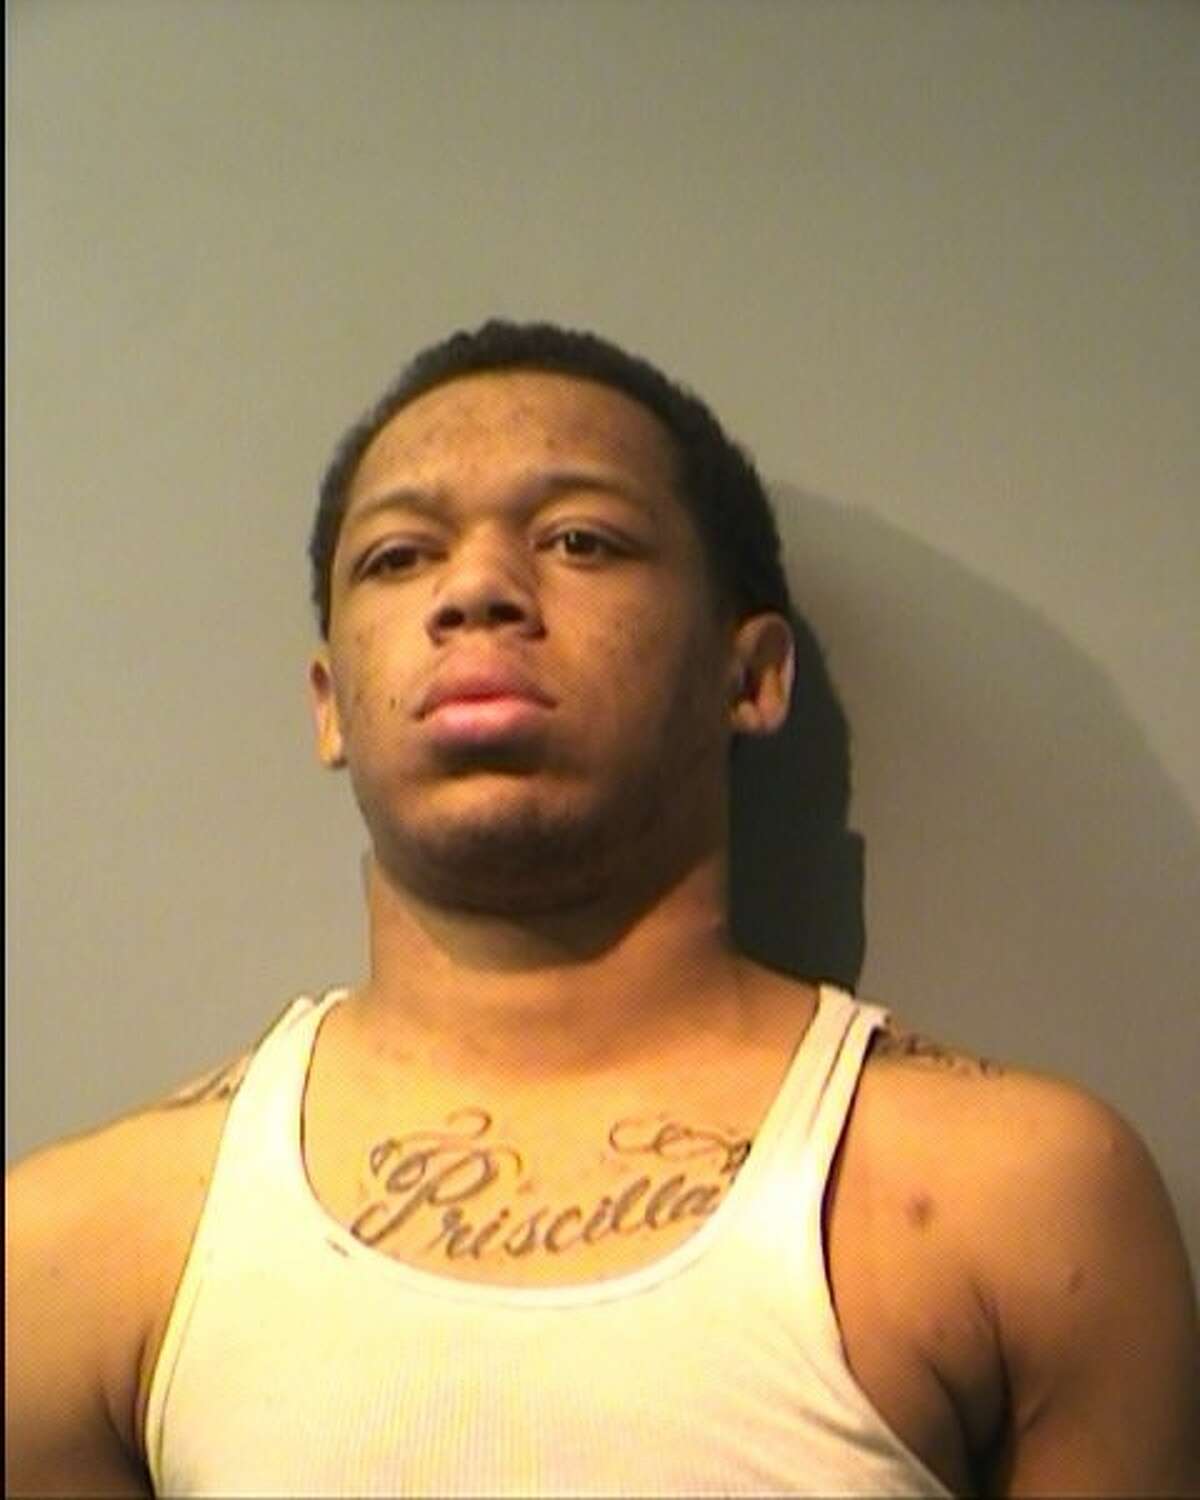 James Turner, 27, was charged in the 182nd district court with burglary of a building with a bond set at $15,000.